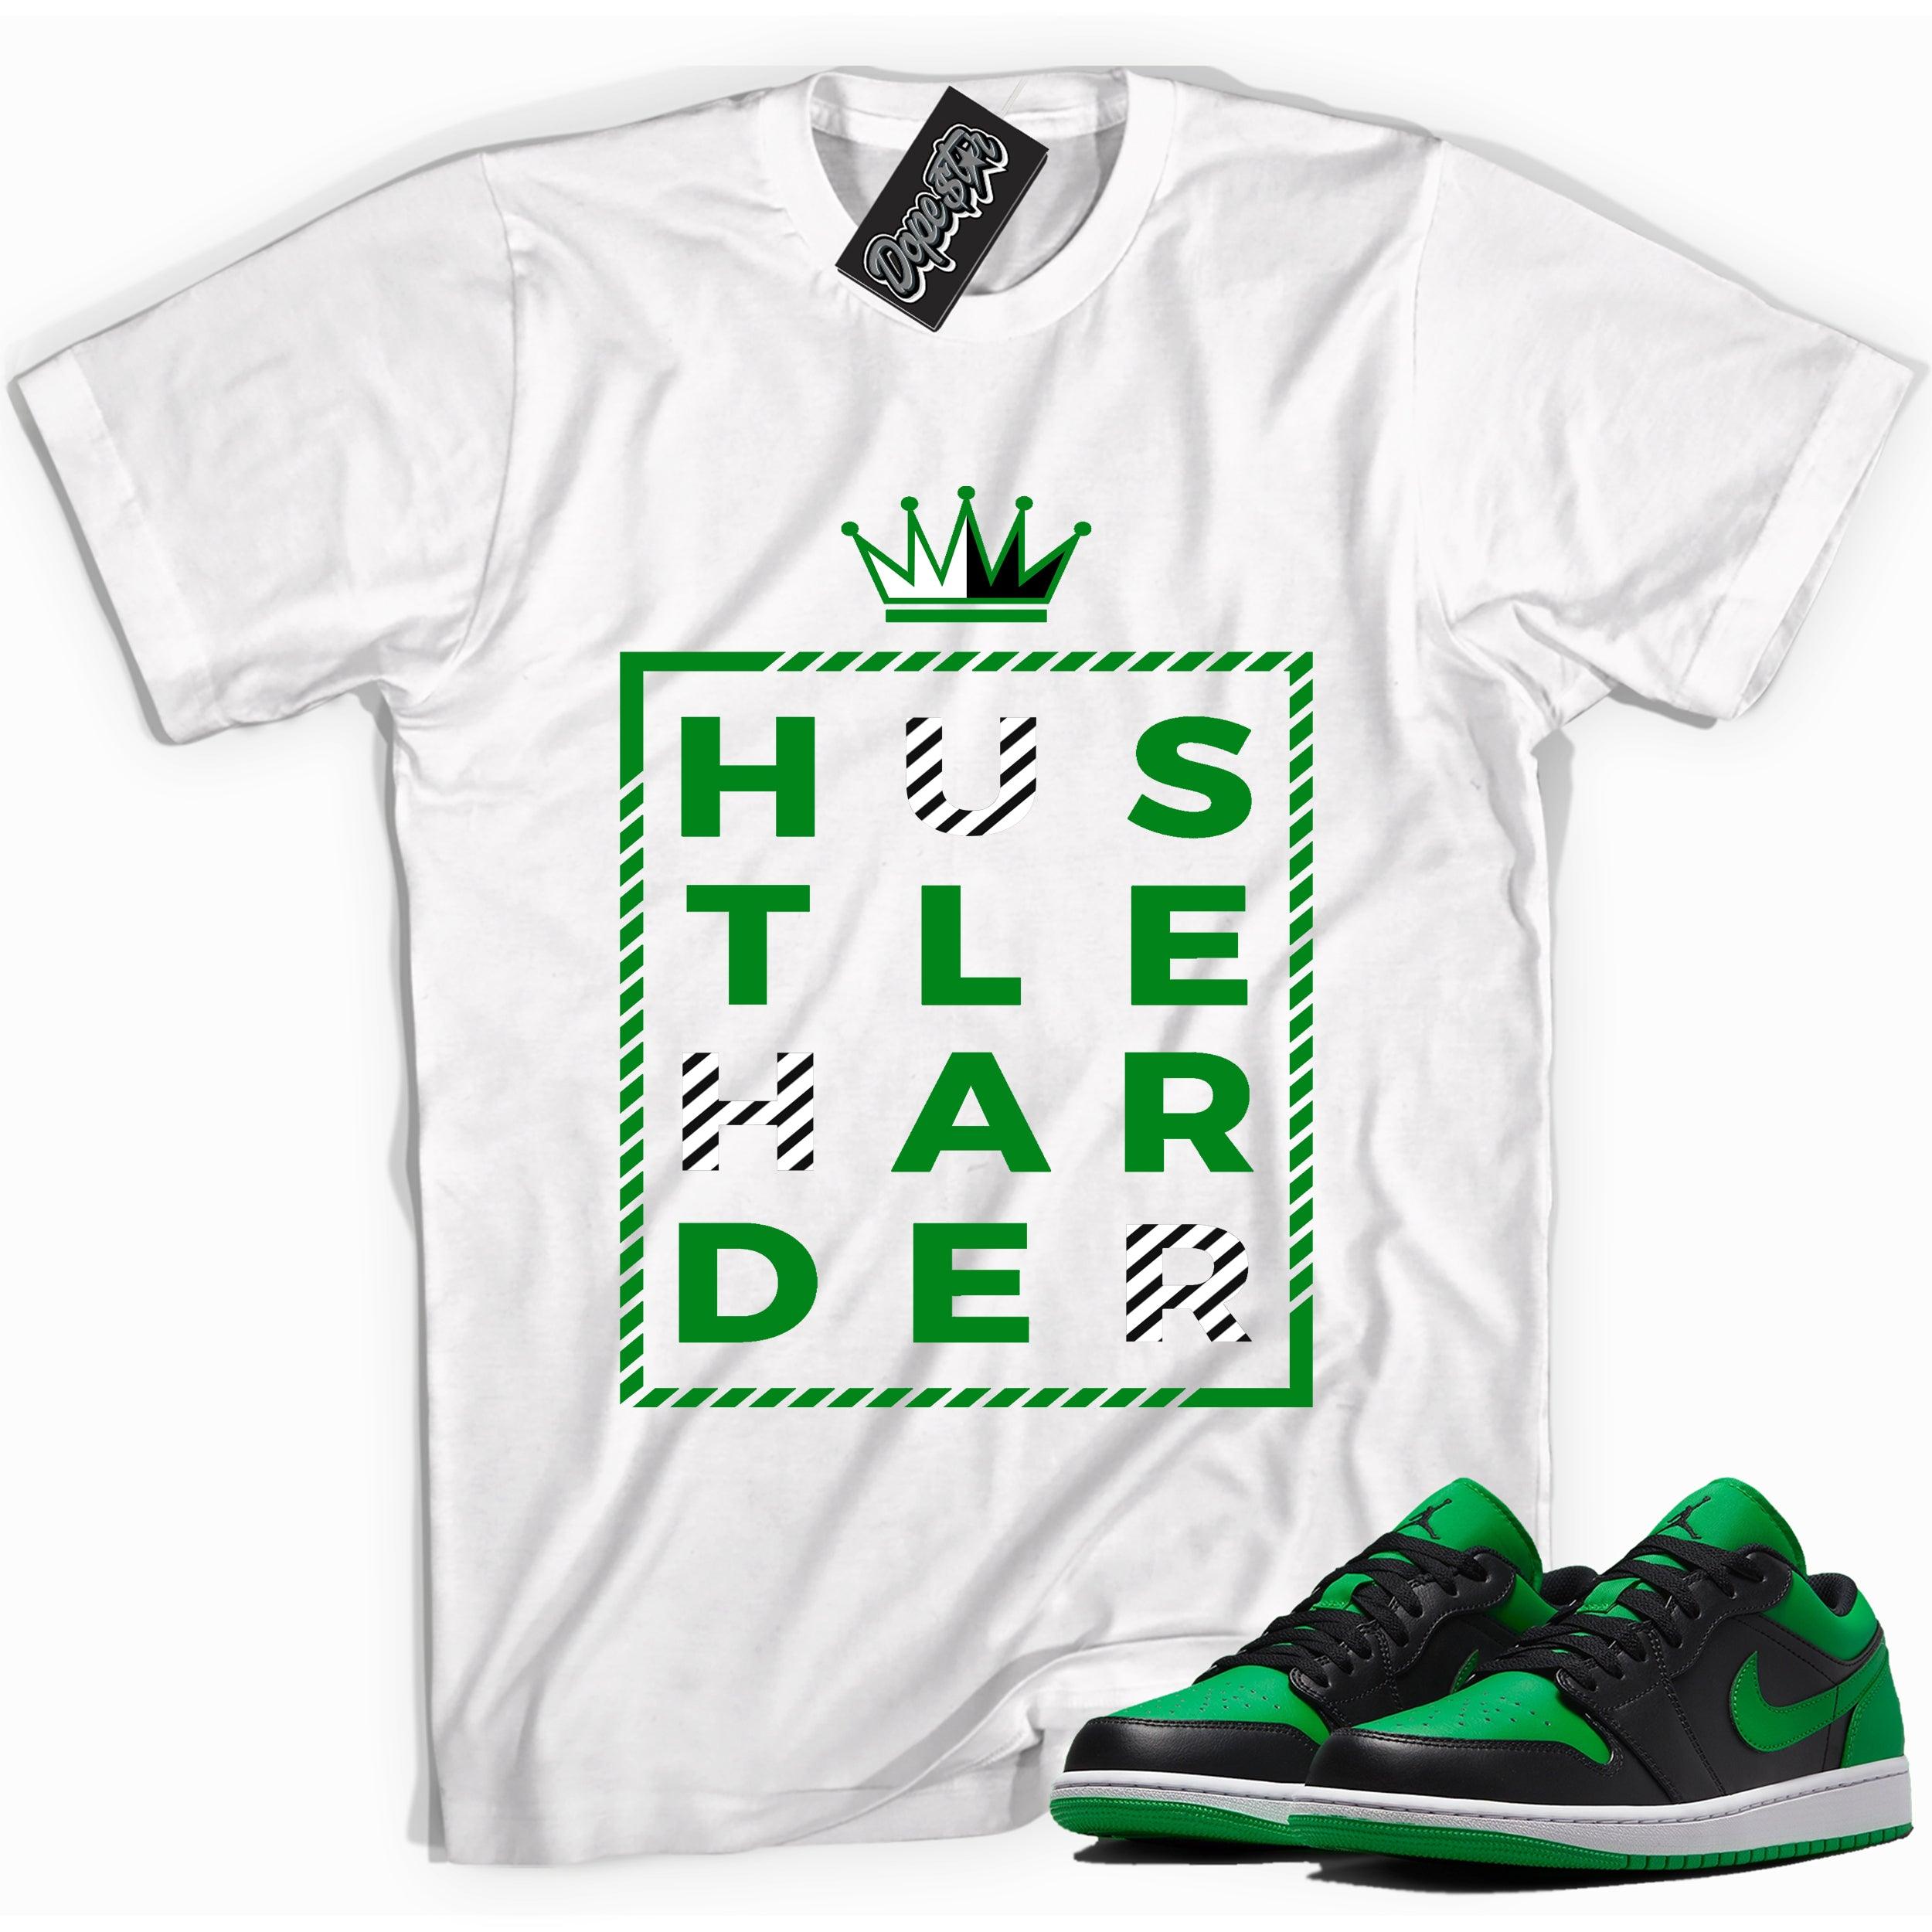 Cool white graphic tee with 'Hustle Harder' print, that perfectly matches Air Jordan 1 Low Lucky Green sneakers